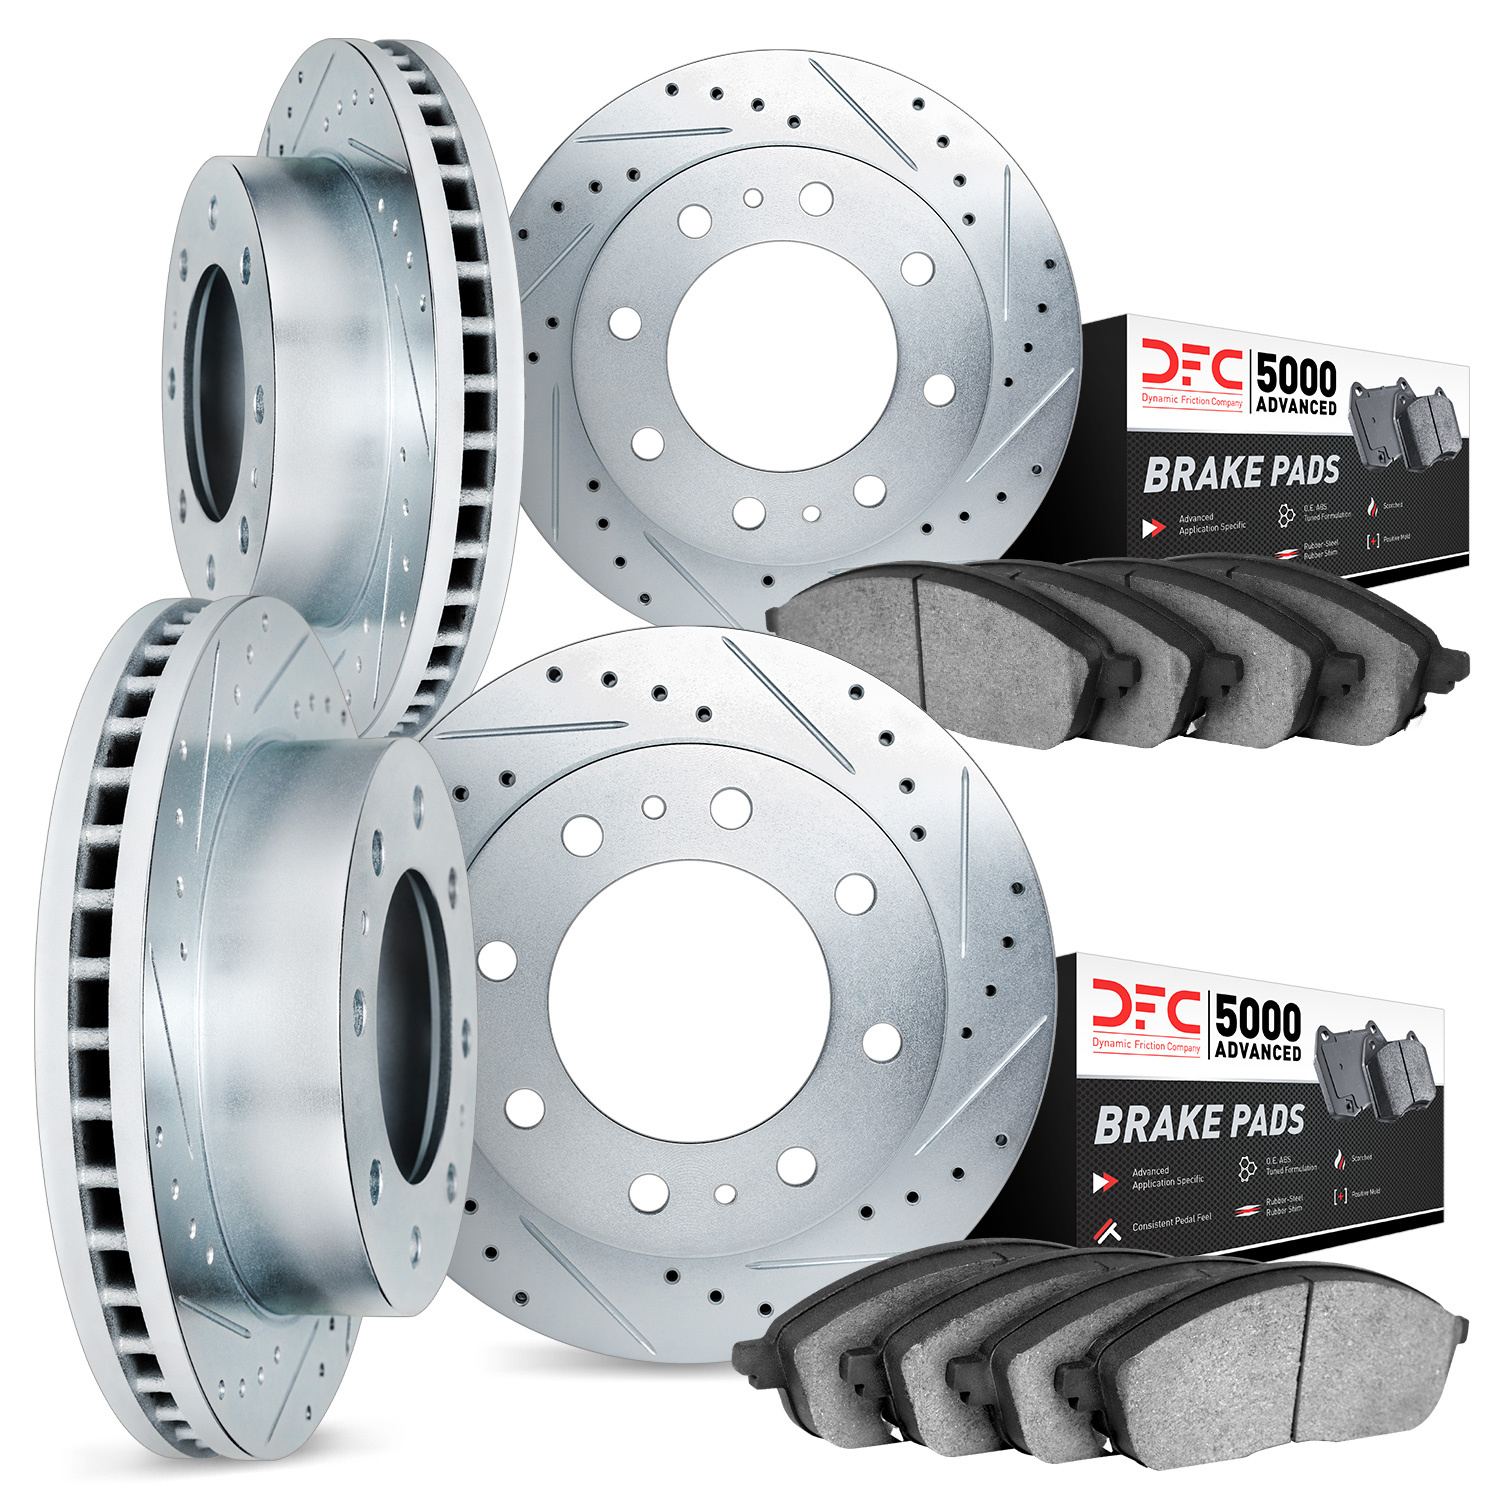 7504-40243 Drilled/Slotted Brake Rotors w/5000 Advanced Brake Pads Kit [Silver], 2003-2008 Mopar, Position: Front and Rear